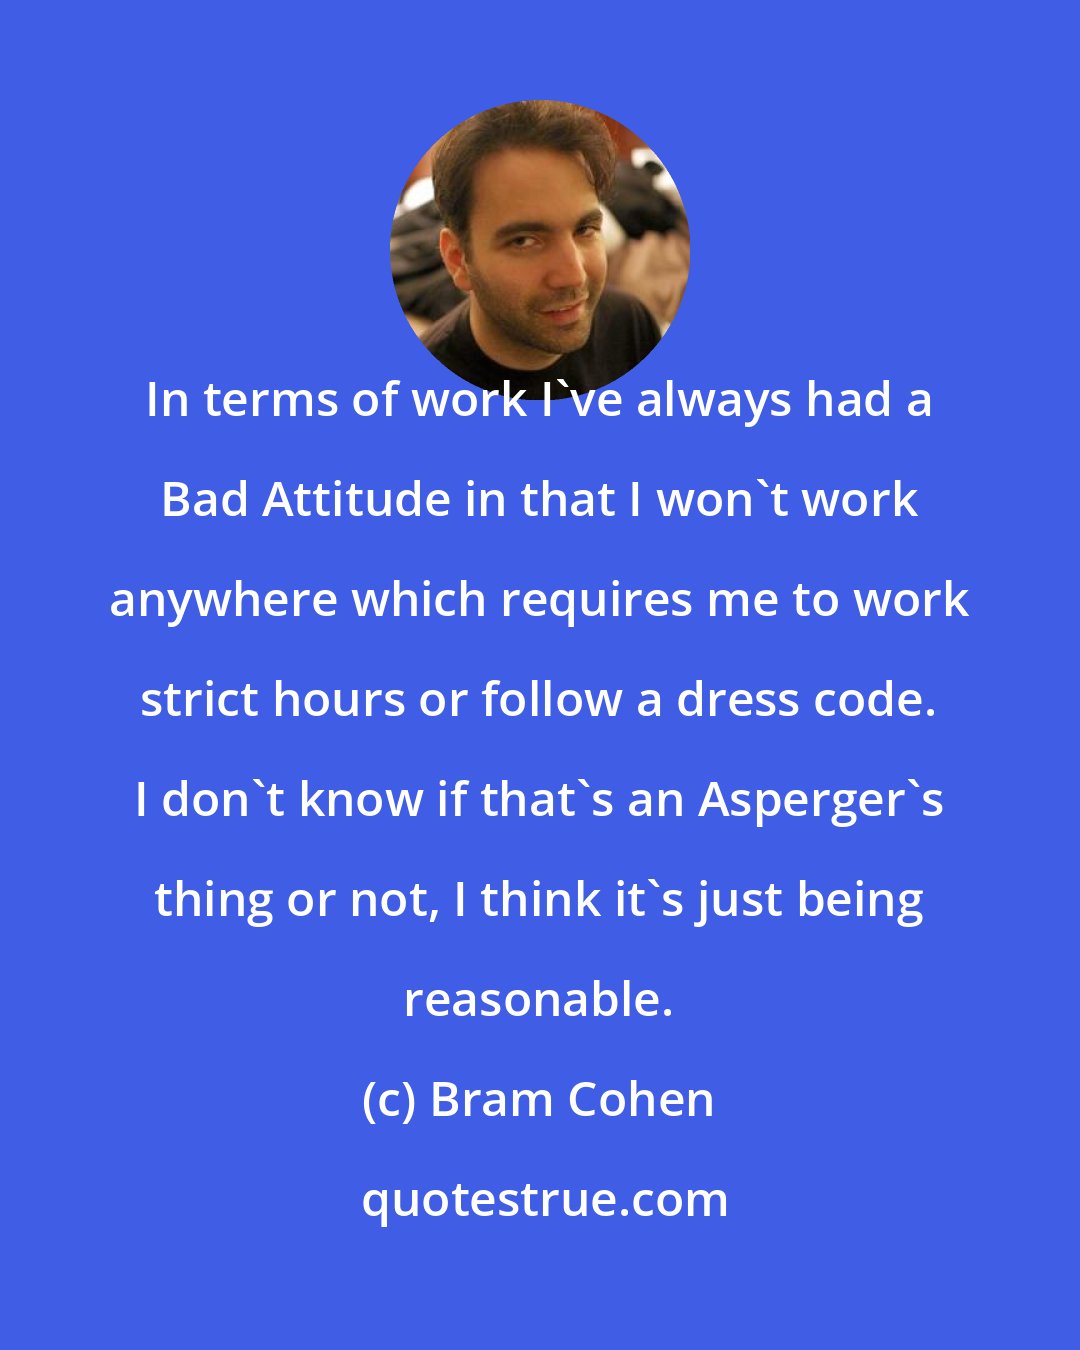 Bram Cohen: In terms of work I've always had a Bad Attitude in that I won't work anywhere which requires me to work strict hours or follow a dress code. I don't know if that's an Asperger's thing or not, I think it's just being reasonable.